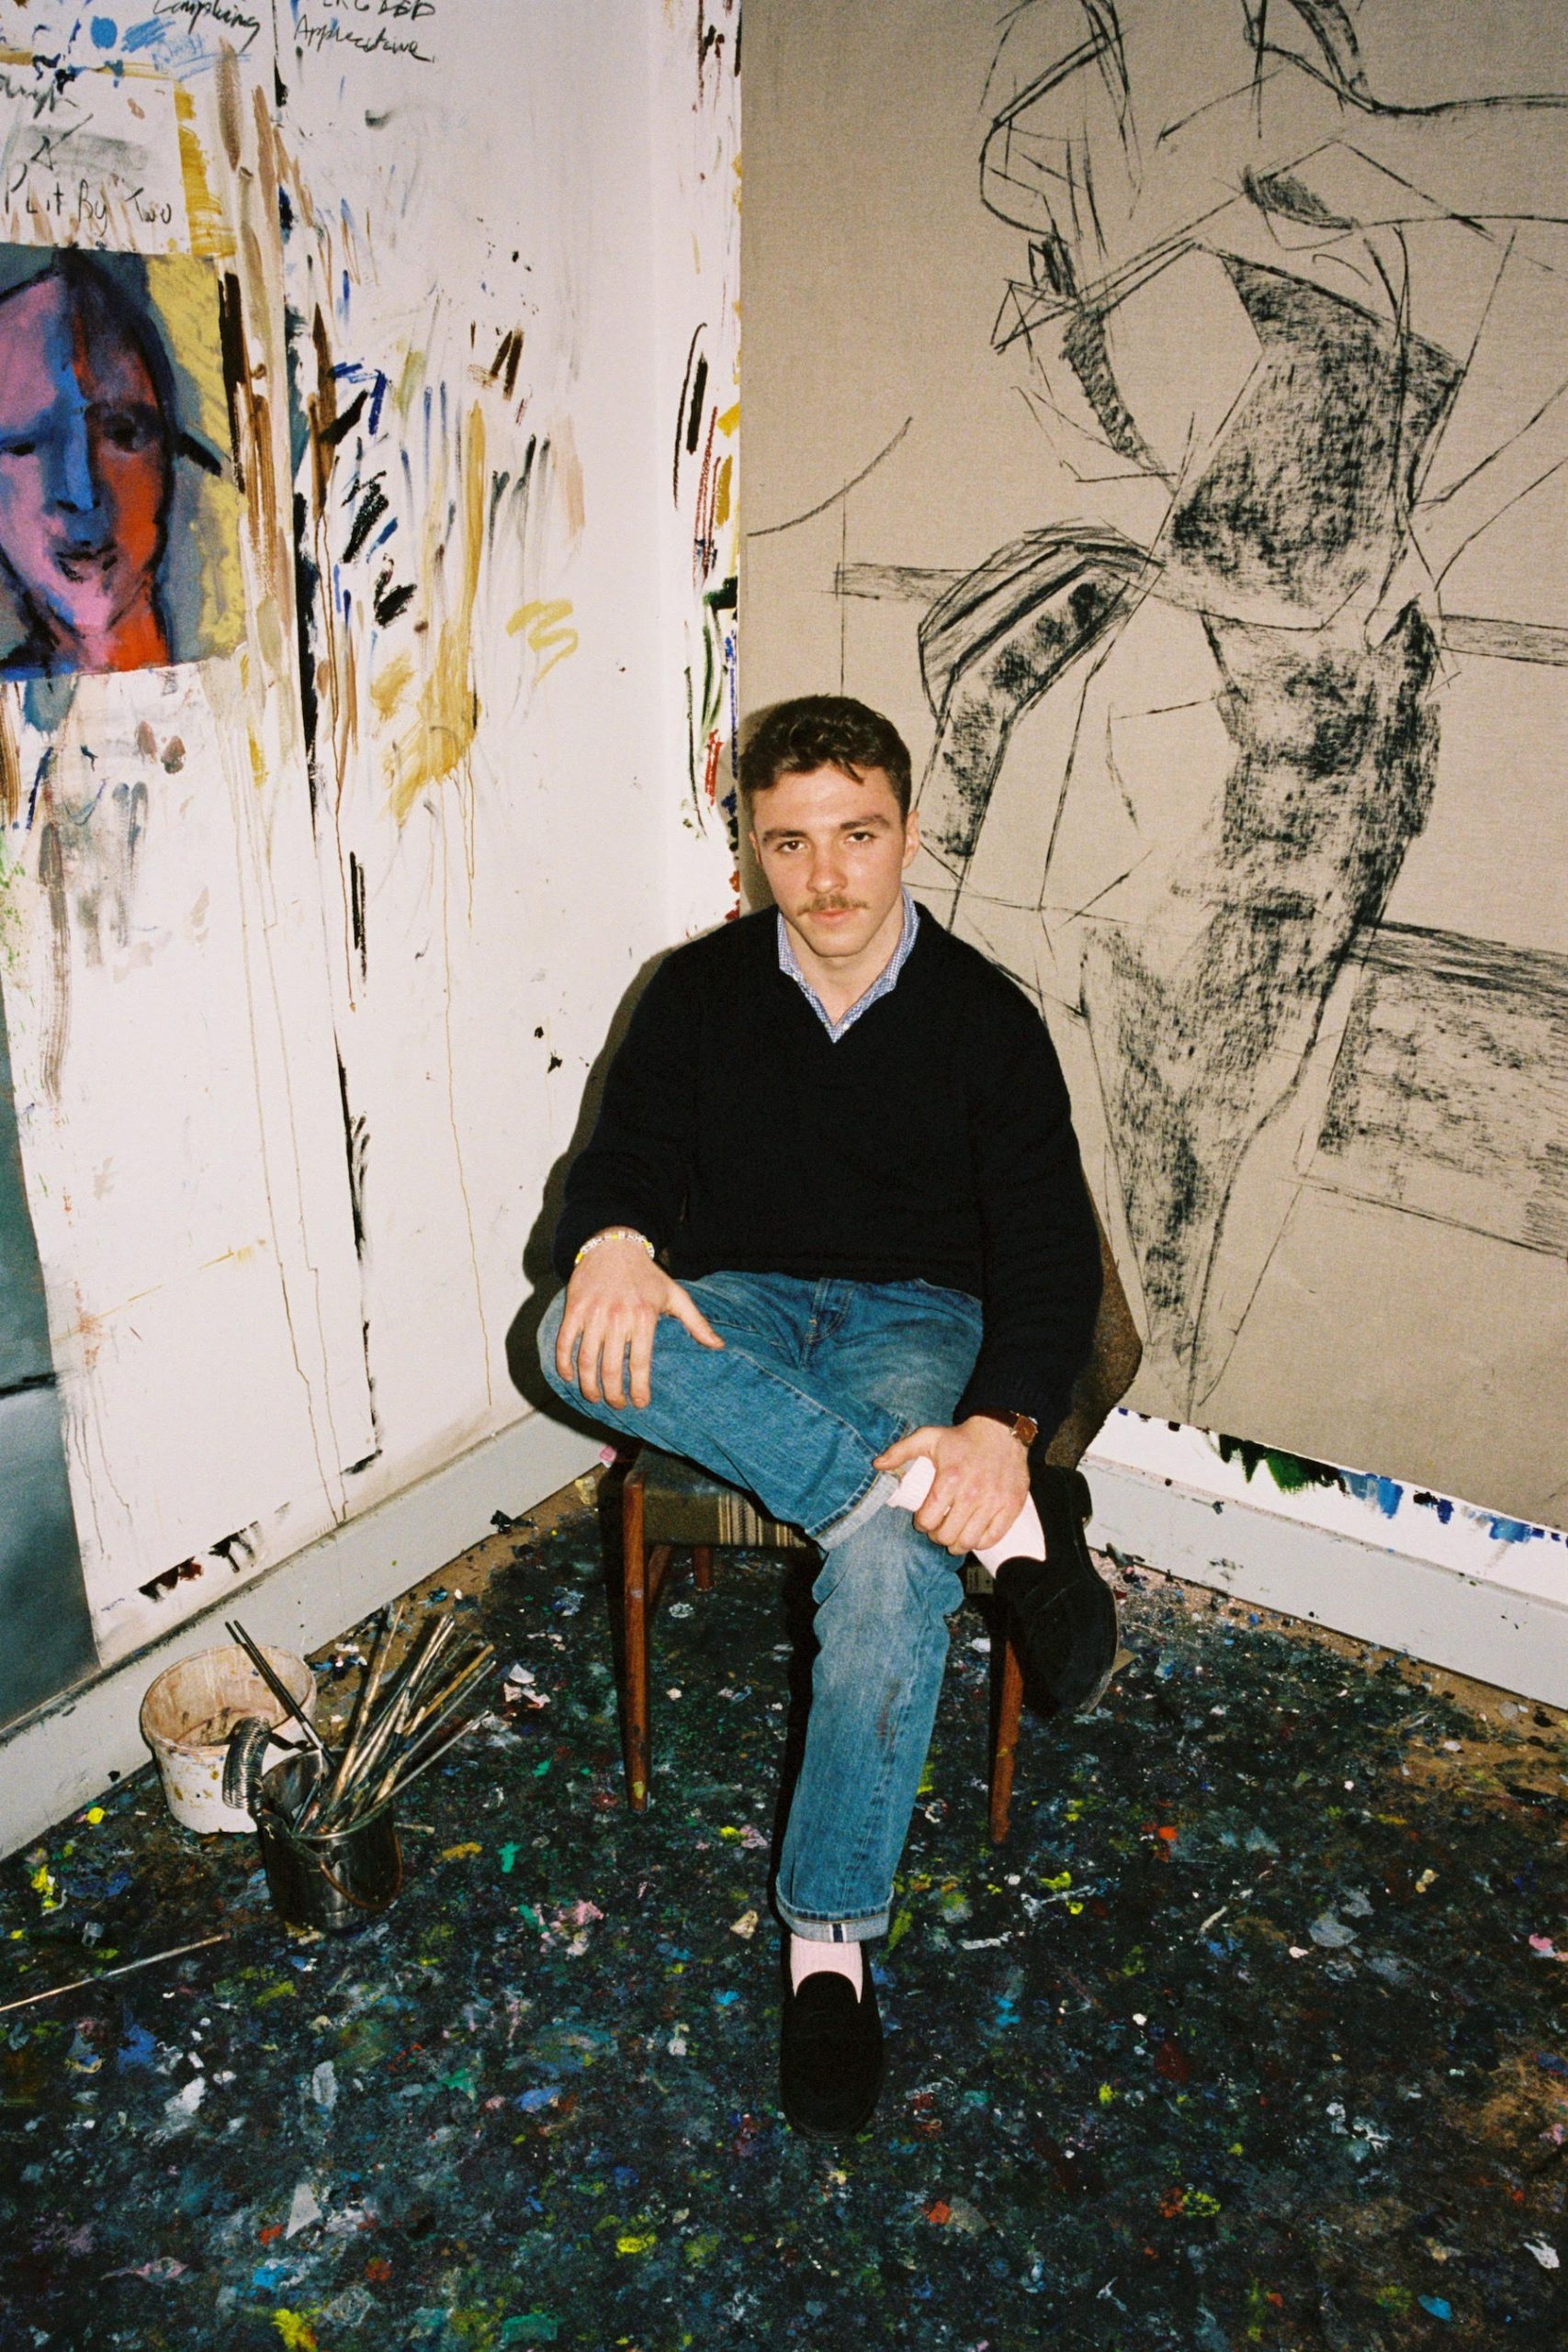 Painter Rocco Ritchie, Son of Madonna, Takes a Bow with Miami Pop-Up